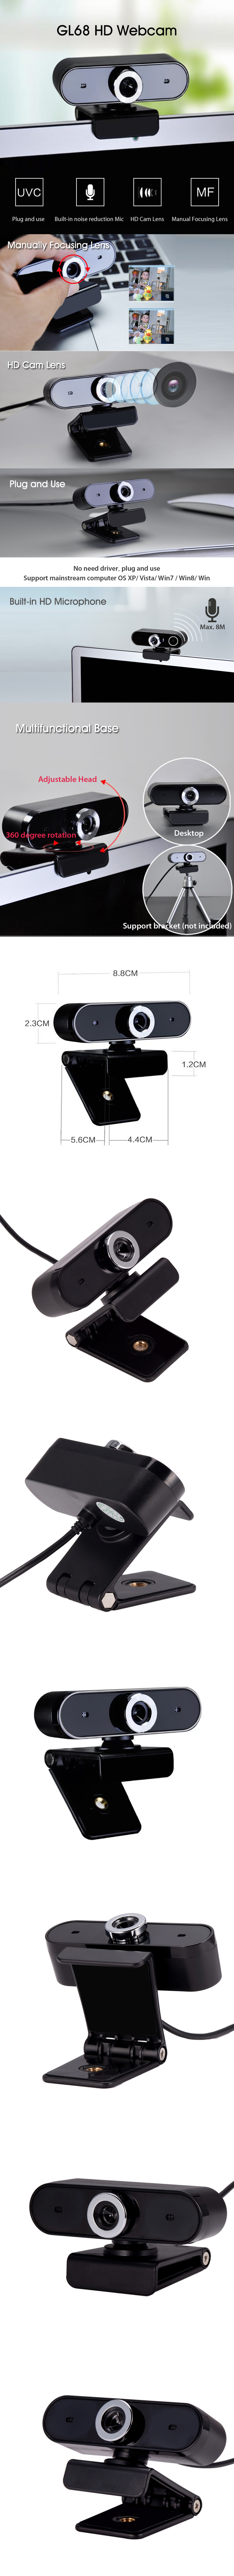 GL68-HD-Webcam-Video-Chat-Recording-USB-Camera-Web-Camera-With-HD-Mic-for-Computer-Desktop-Laptop-On-1660522-1